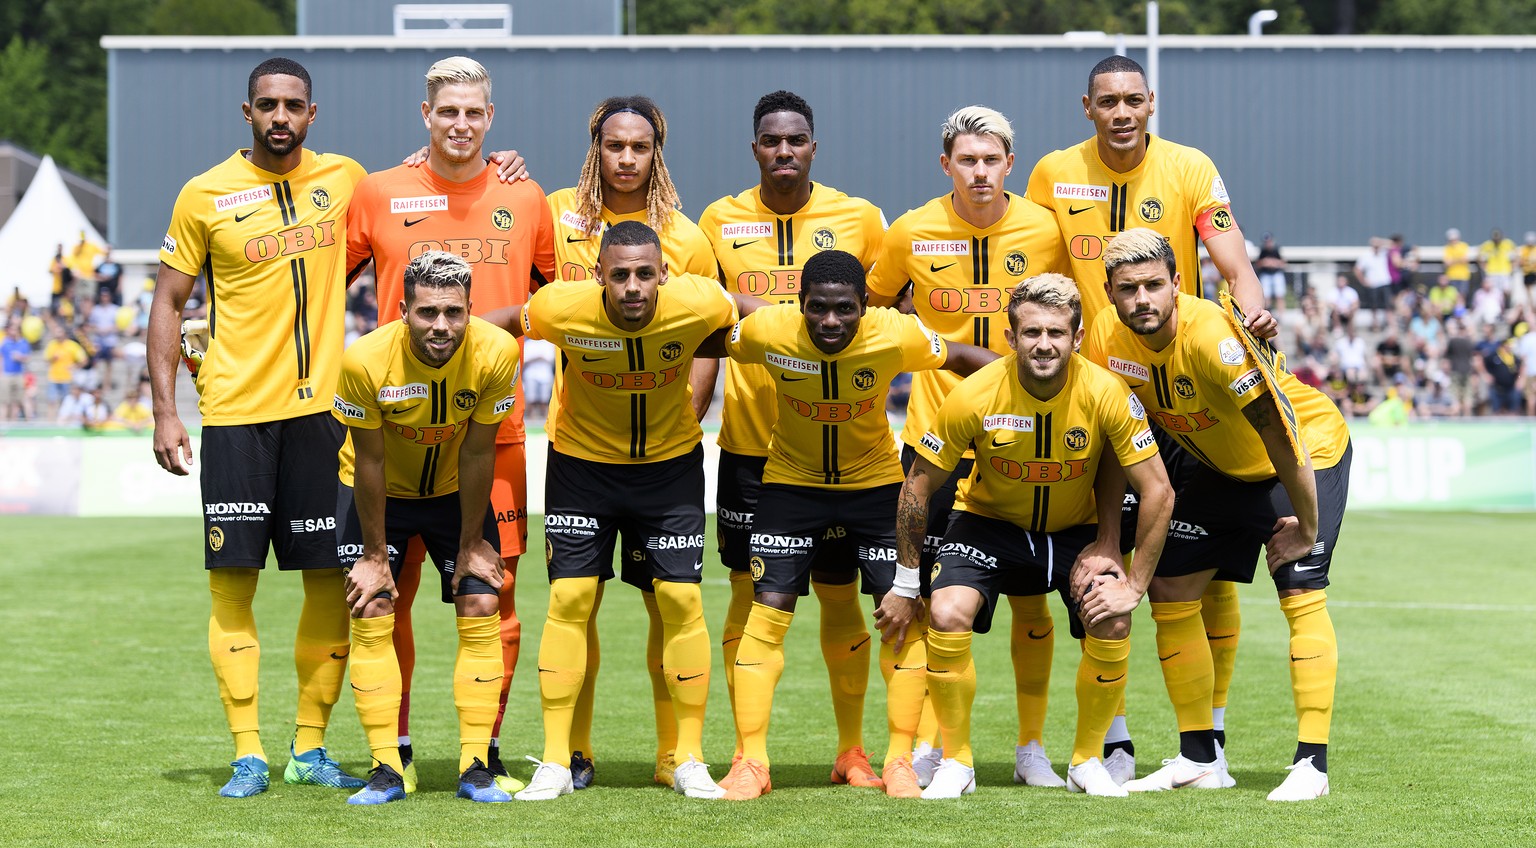 YBs players take a pose during a friendly soccer match of the international Uhrencup tournament between Switzerland&#039;s BSC Young Boys and England&#039;s Wolverhampton Wanderers F.C. at the Stadion ...